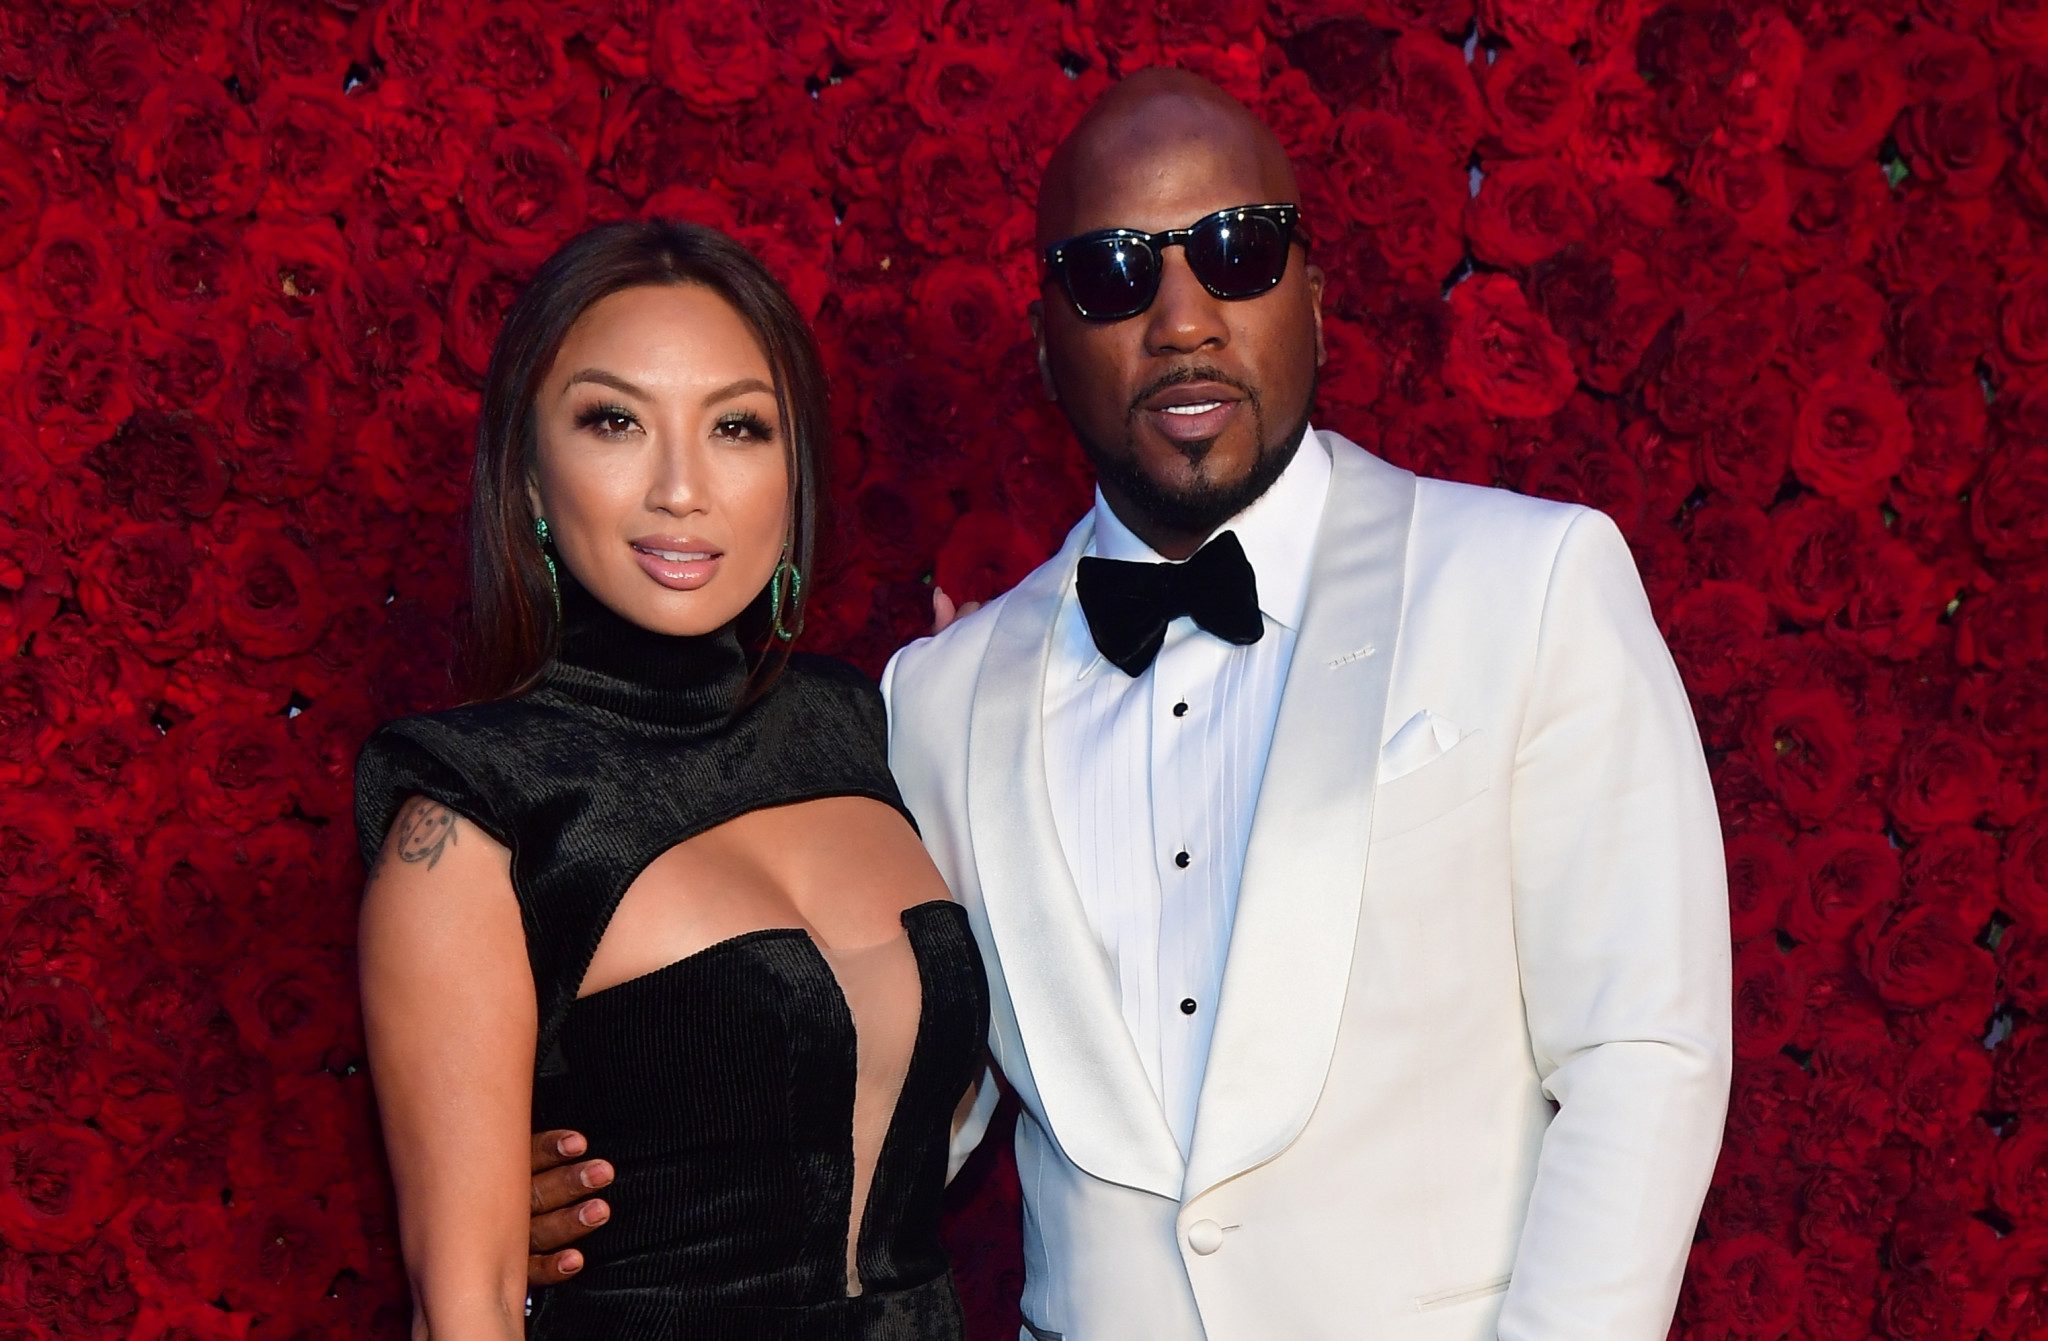 Jeannie Mai says Jeezy has been experiencing pregnancy symptoms